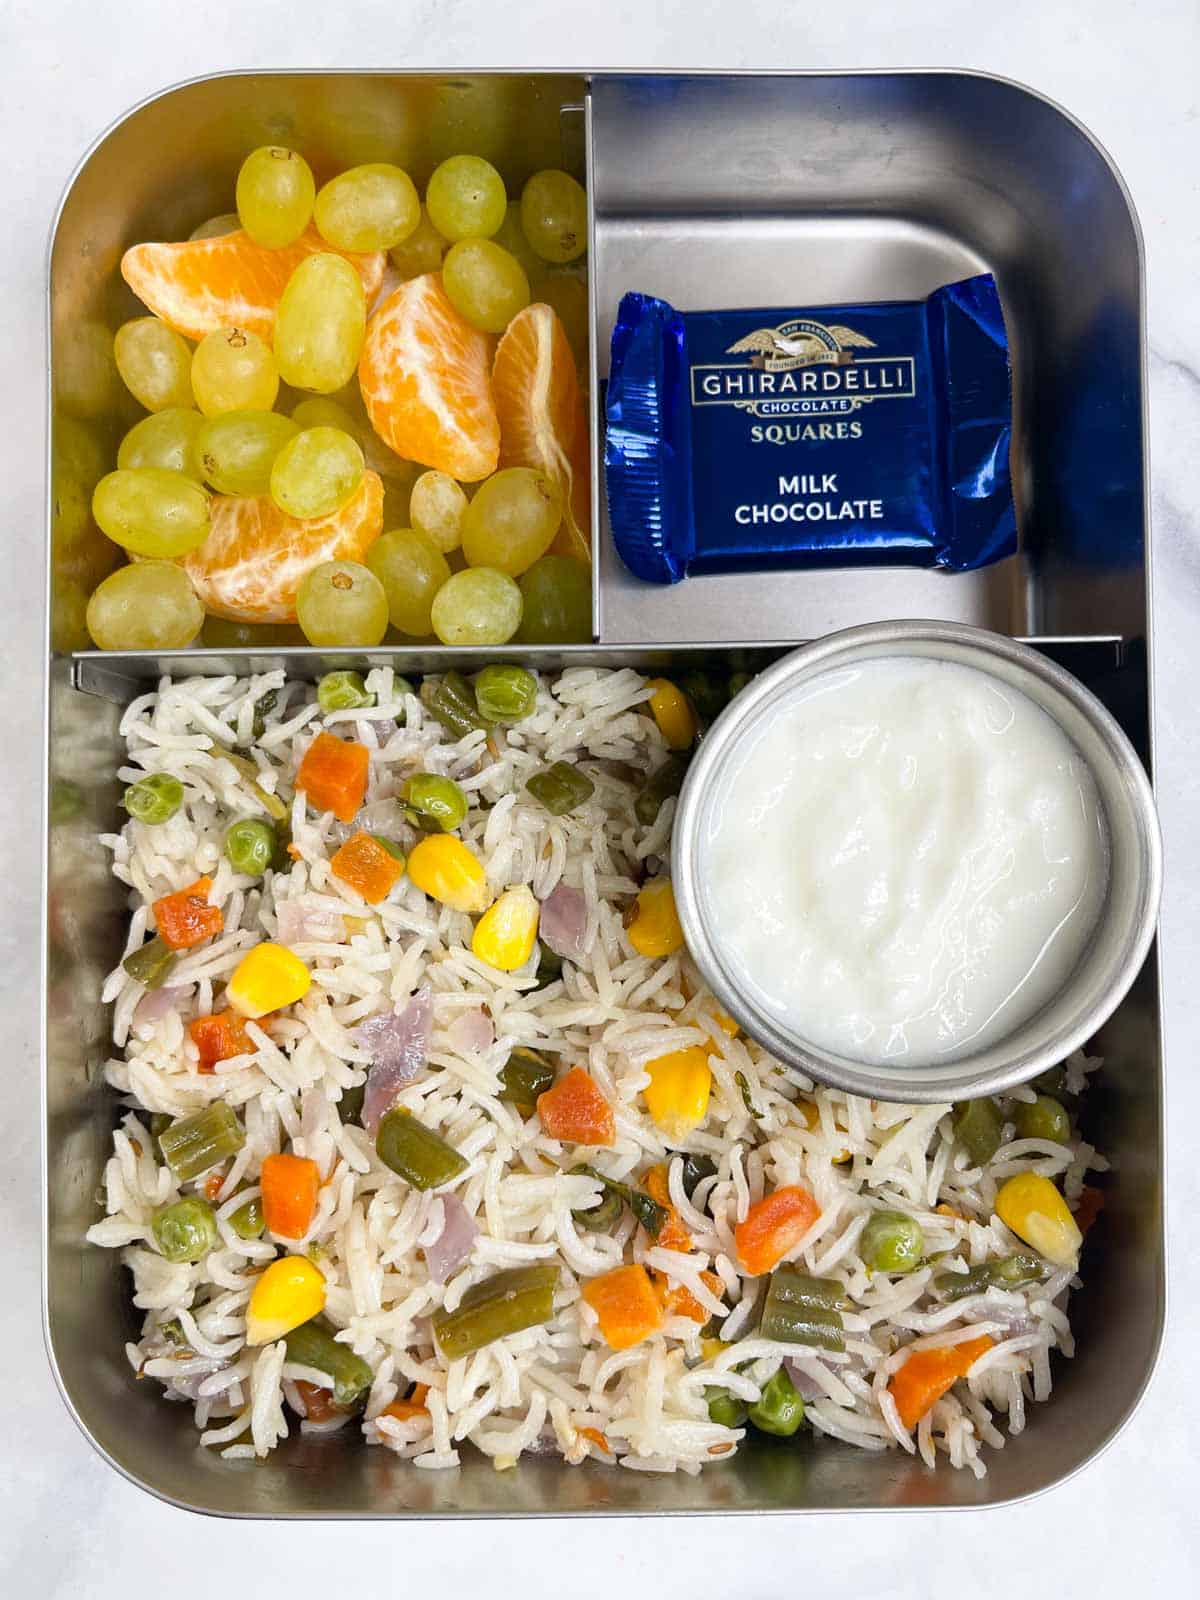 vegetable pulao with yogurt, fruits and chocolate in bento school lunch box